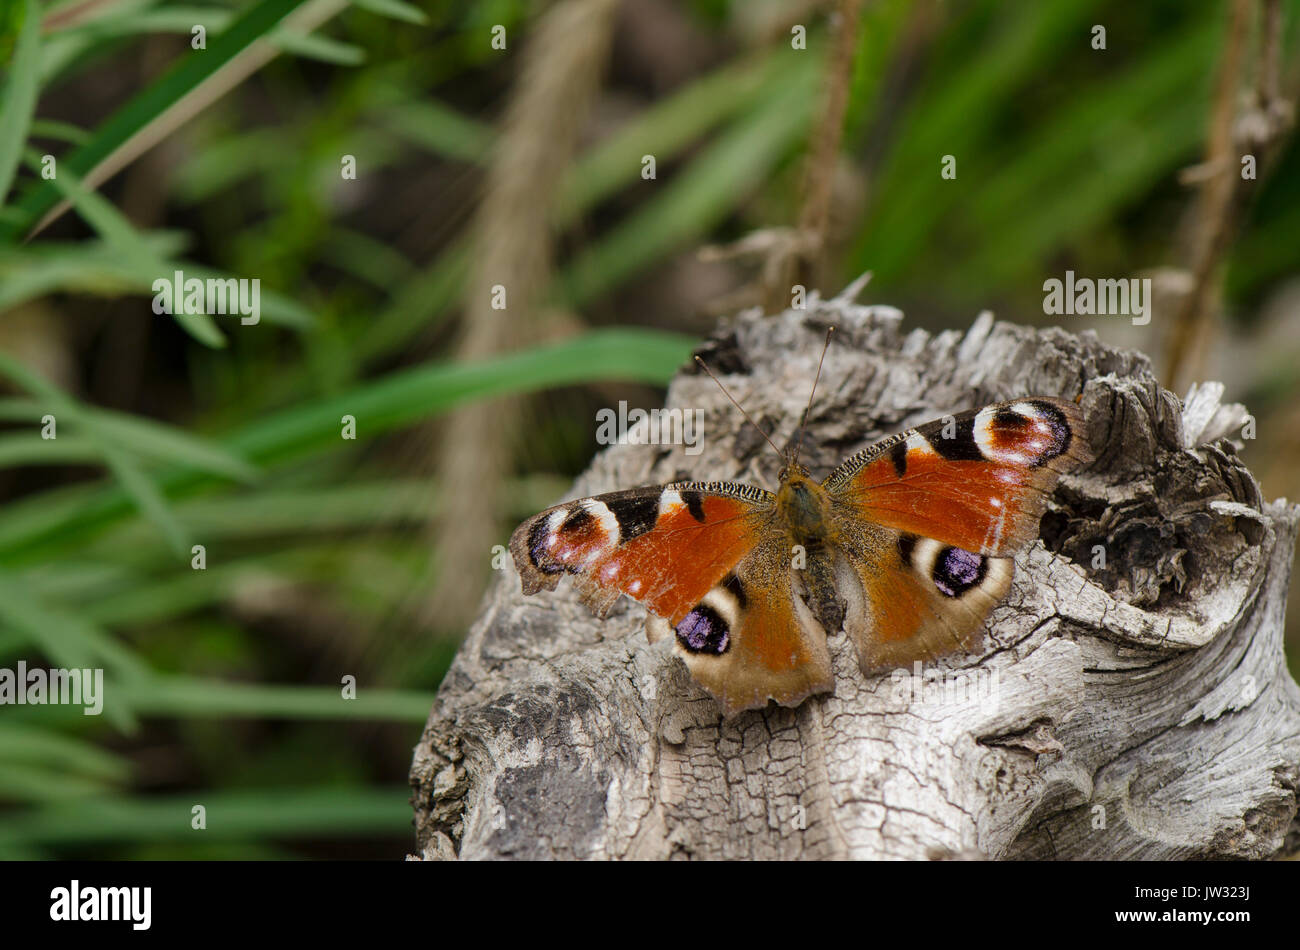 European peacock, Aglais io, peacock butterfly, resting on wooden log. Netherlands. Stock Photo